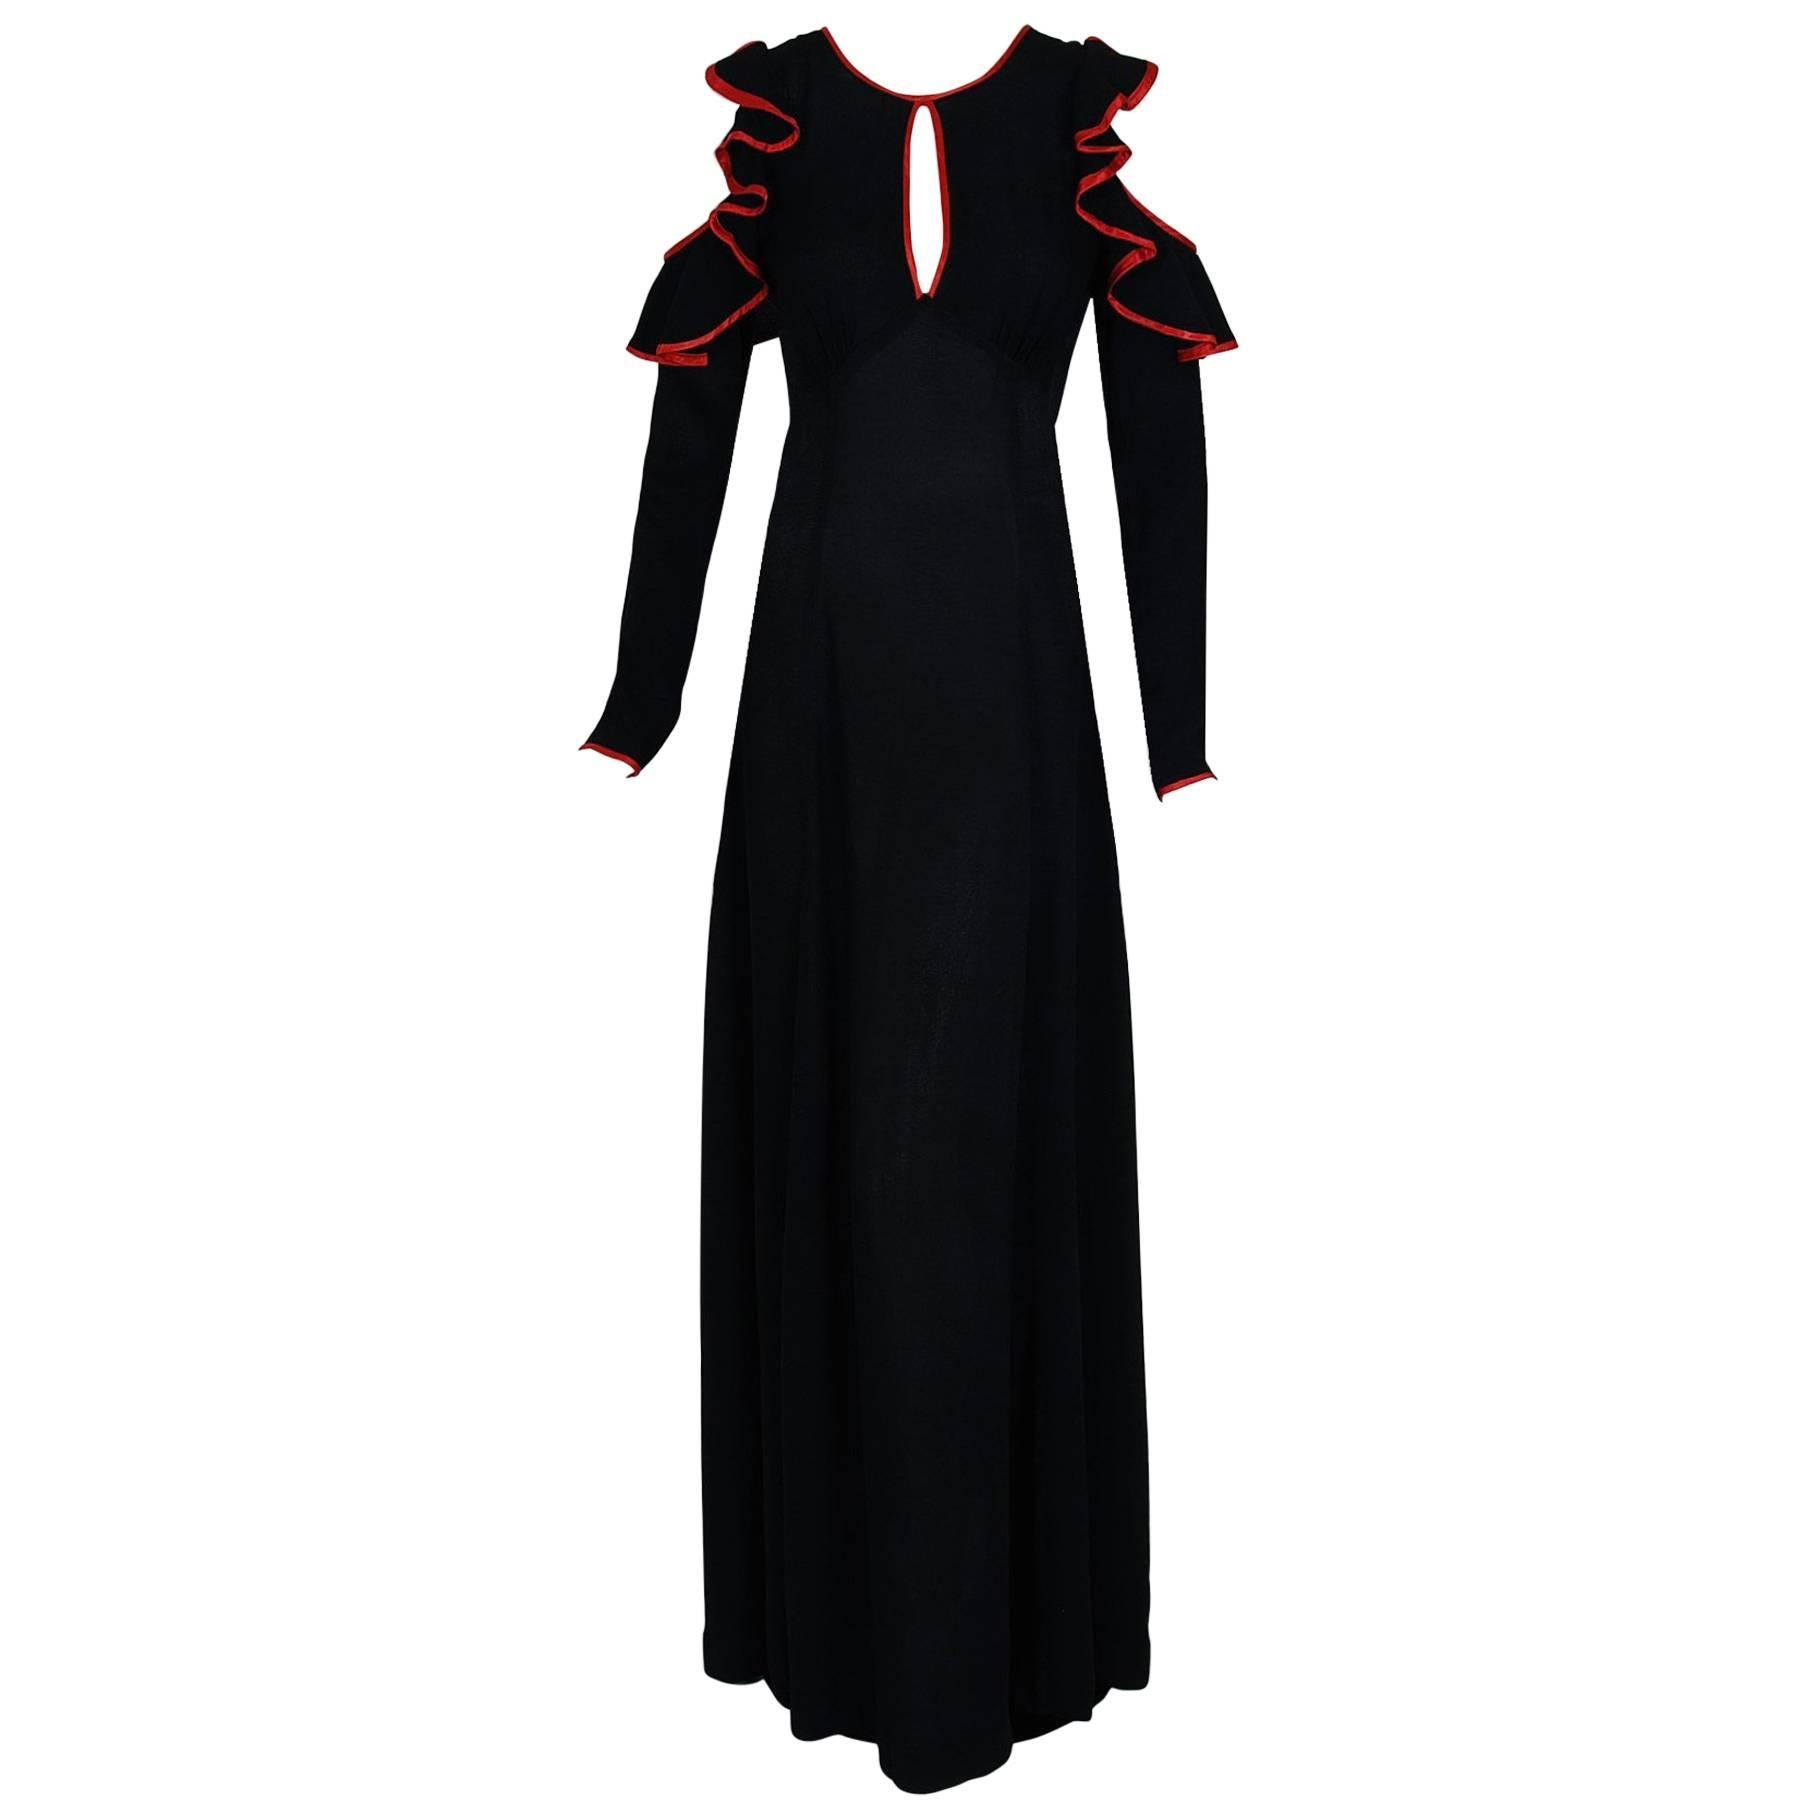 1970's Ossie Clark Black Moss-Crepe & Red Satin Cut-Out Ruffle Backless Dress